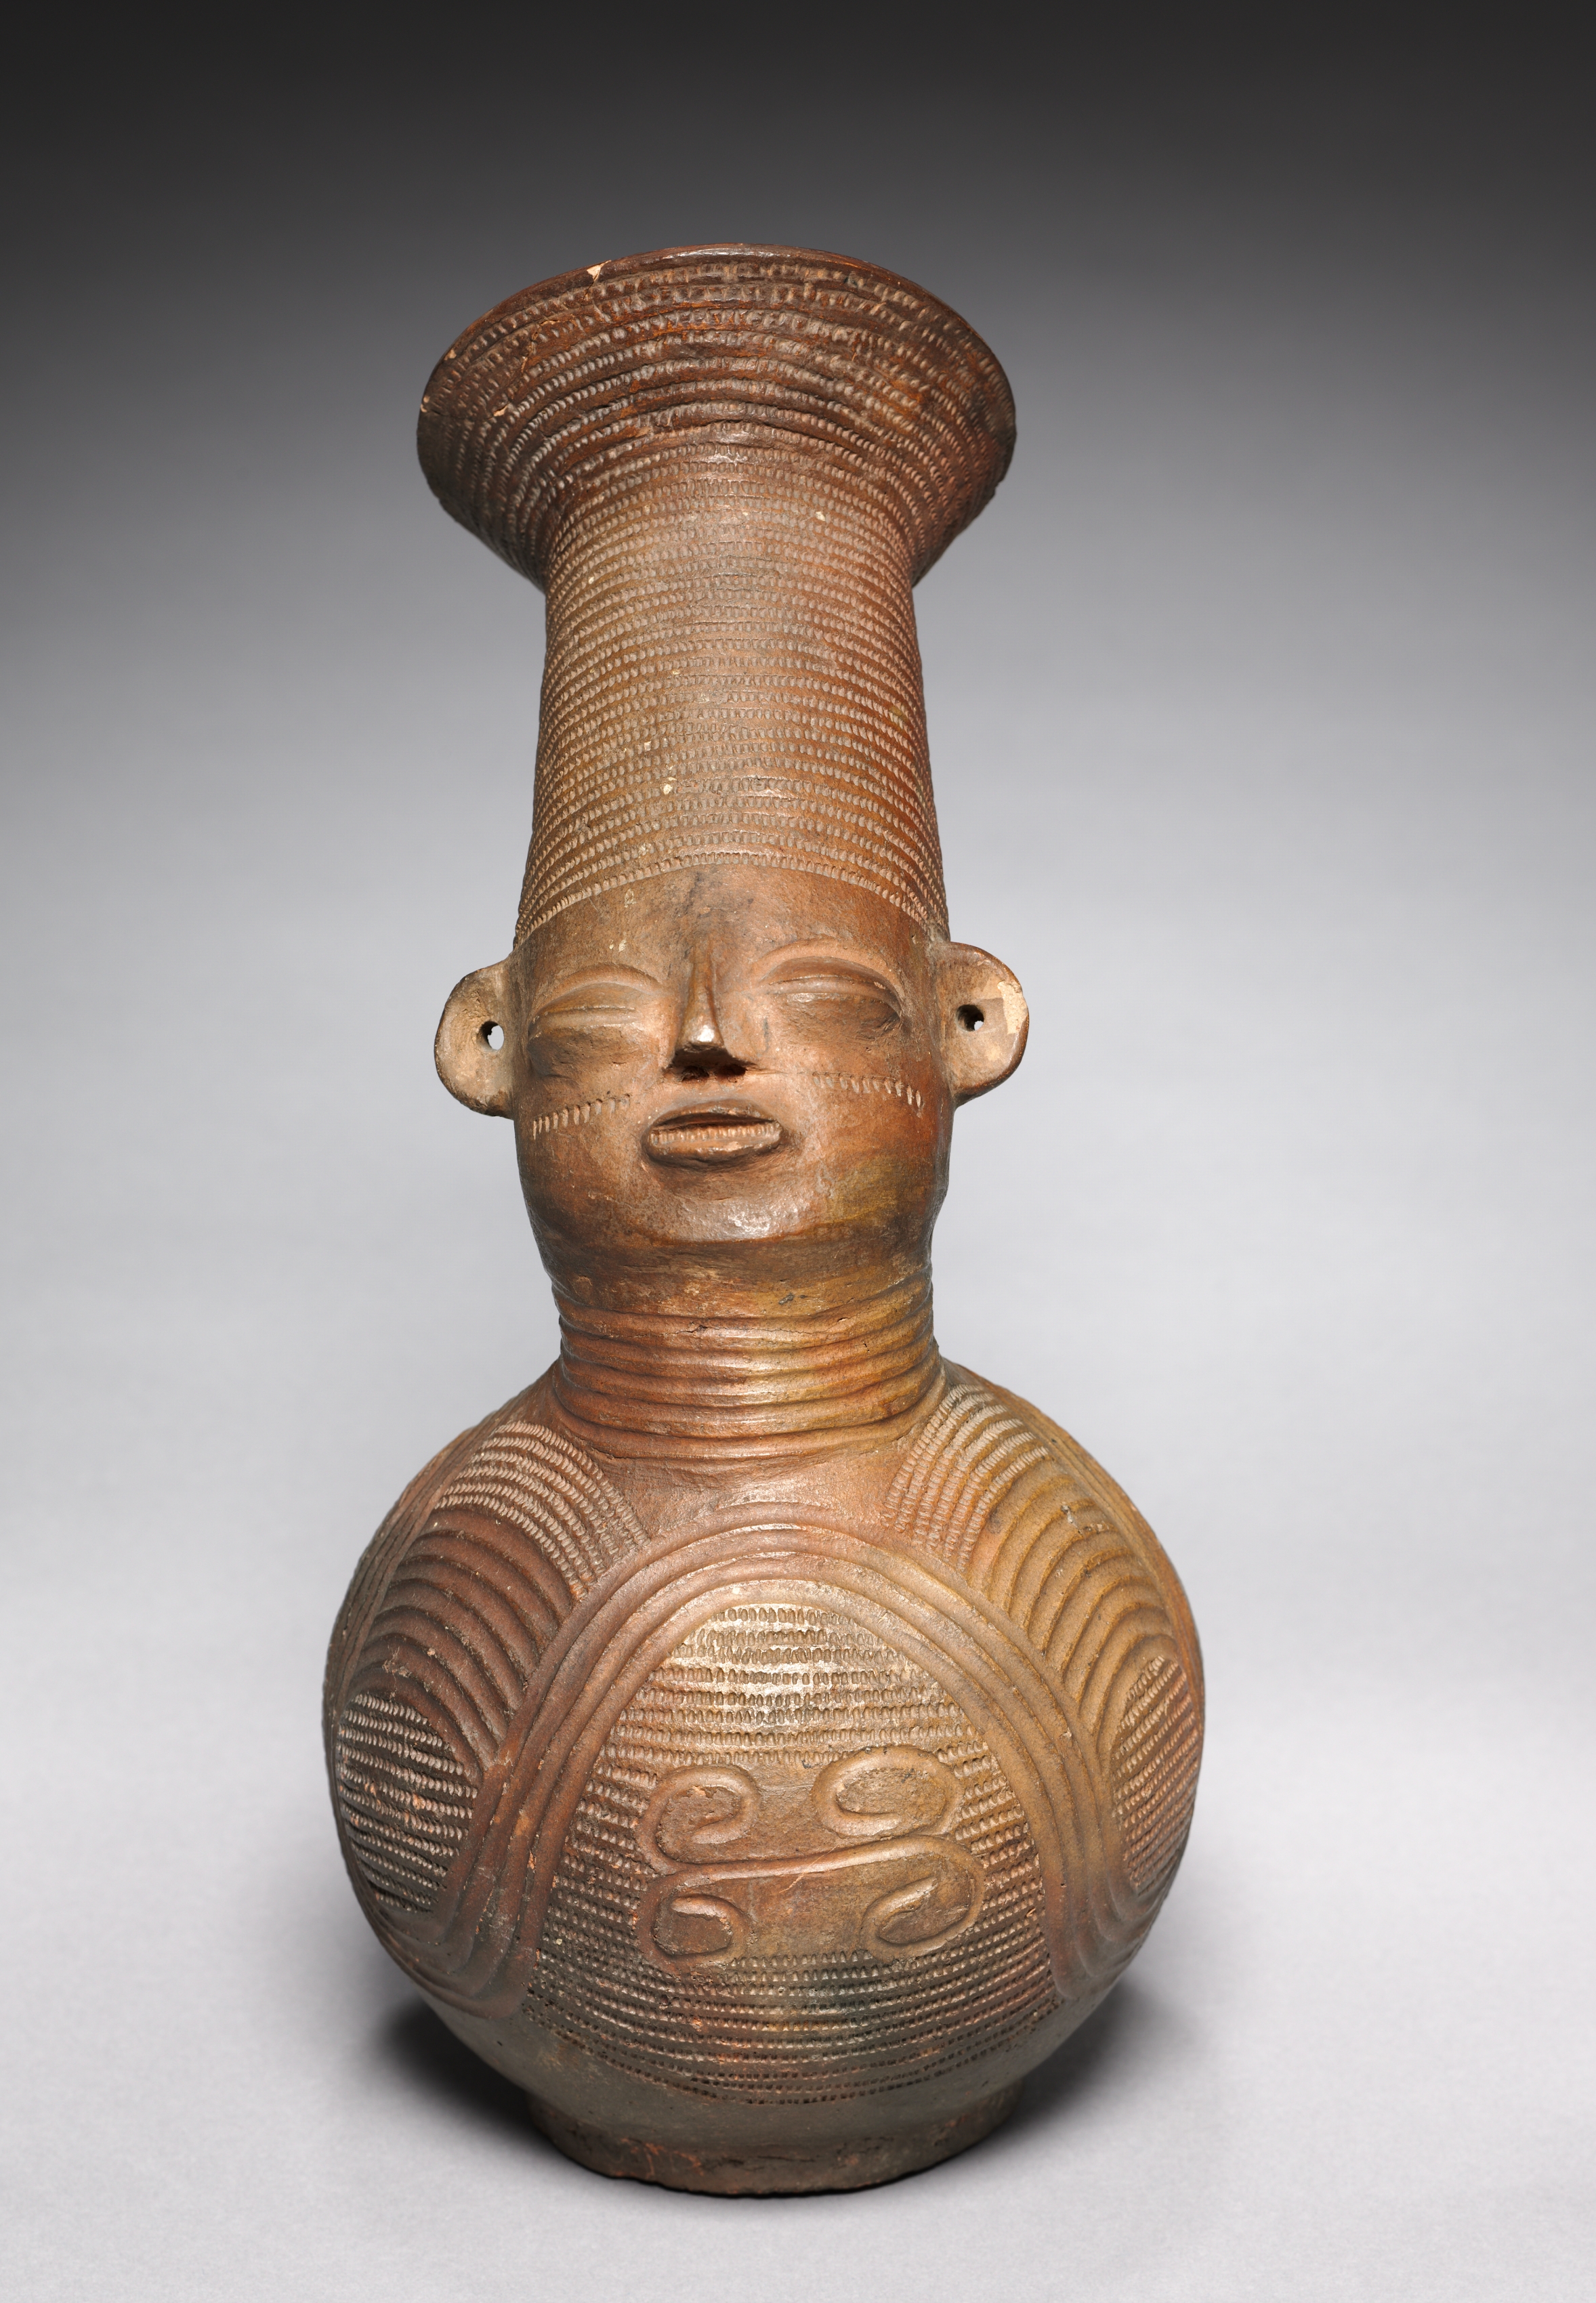 Vessel in the Form of a Woman's Head